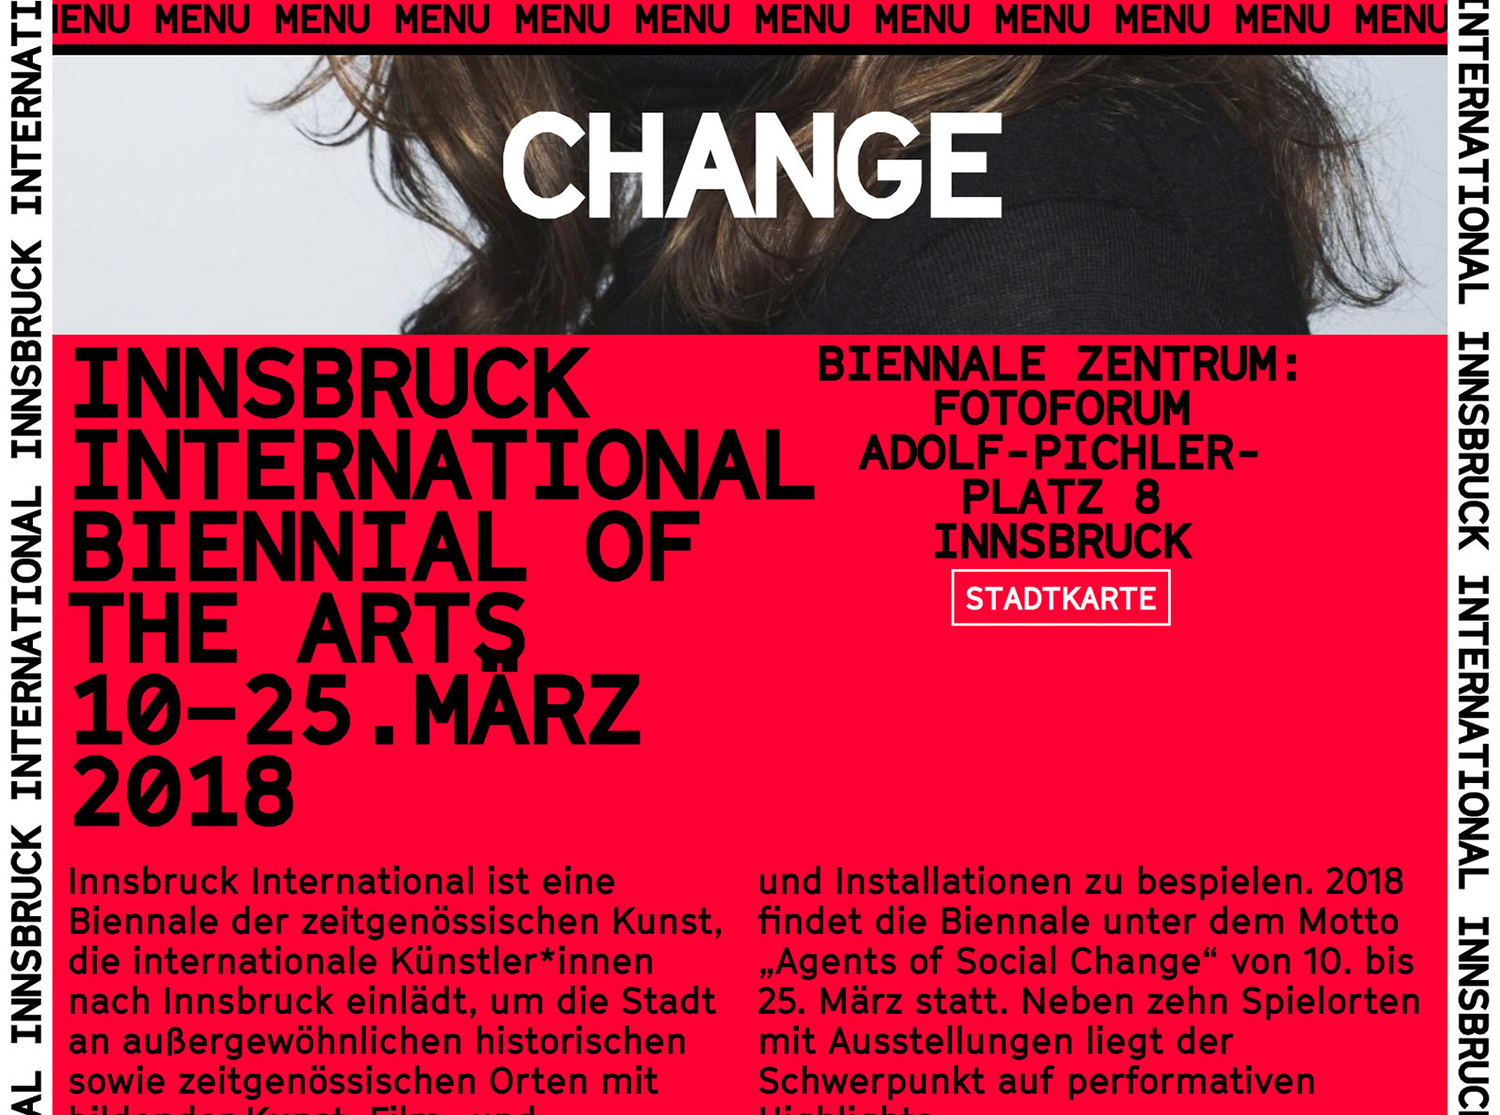 Logo, visual identity, posters, programmes and website designed by Studio Mut for Innsbruck International, Biennial of the Arts